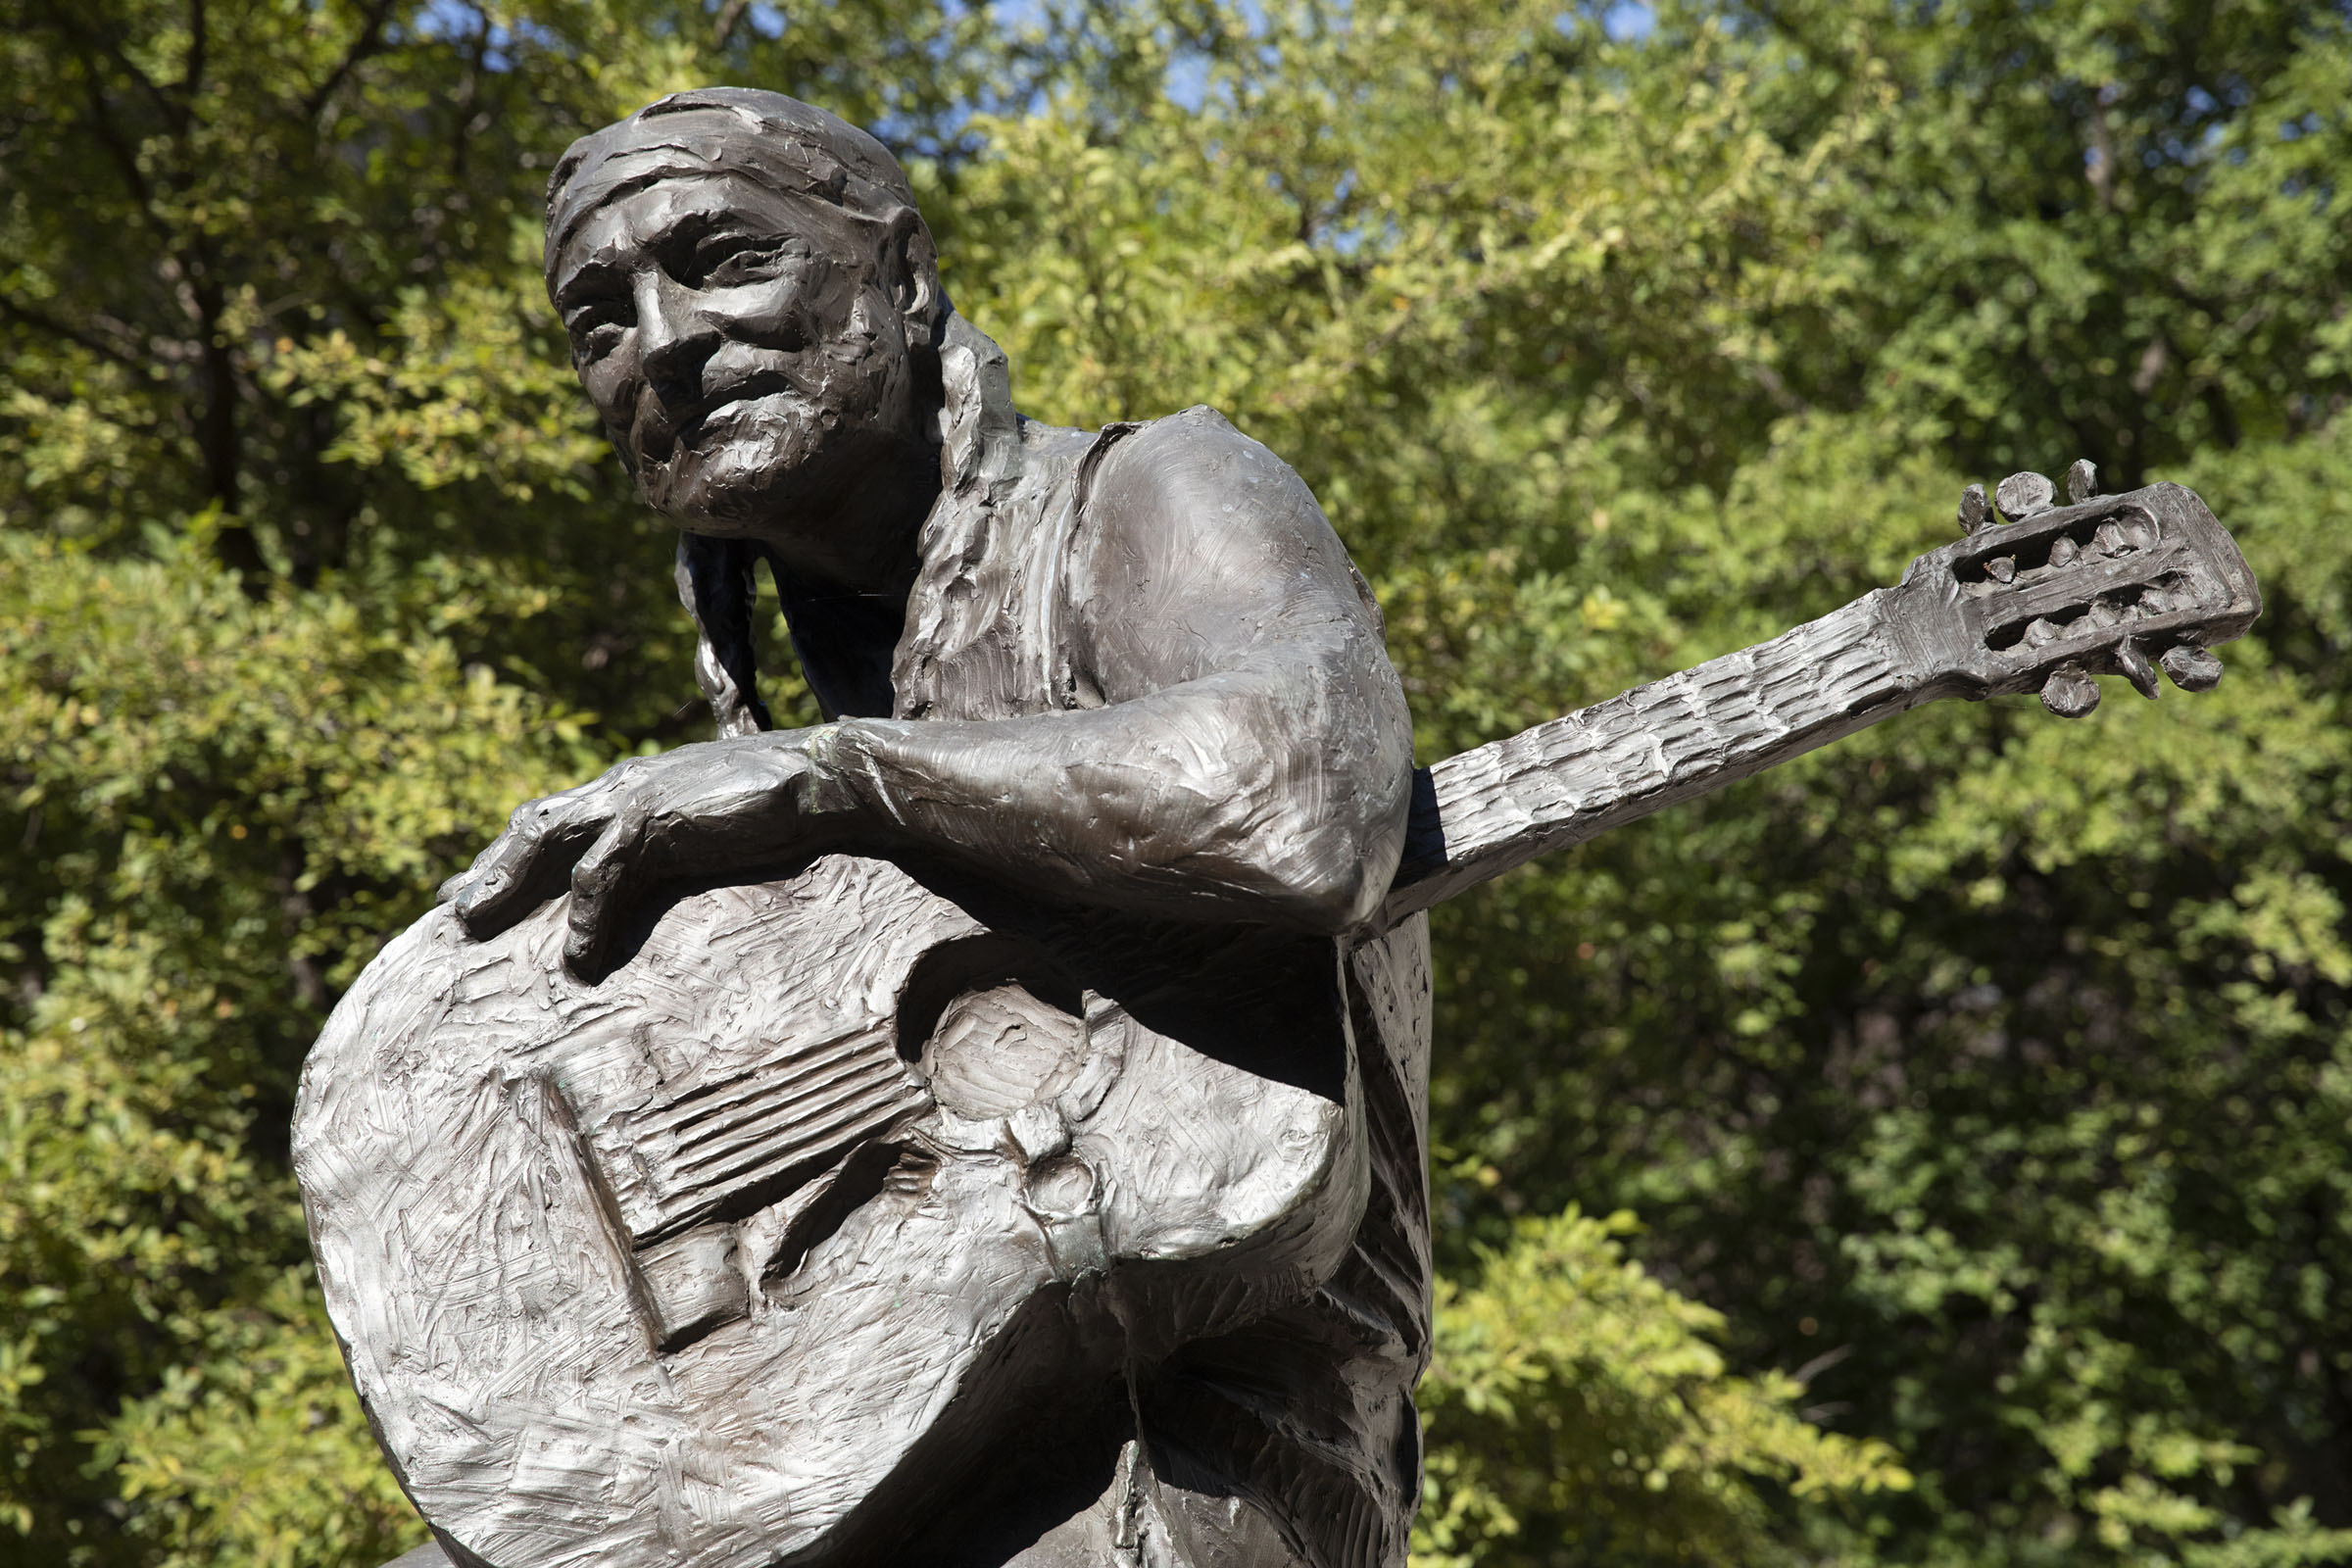 A statue of Willie Nelson sitting with a guitar